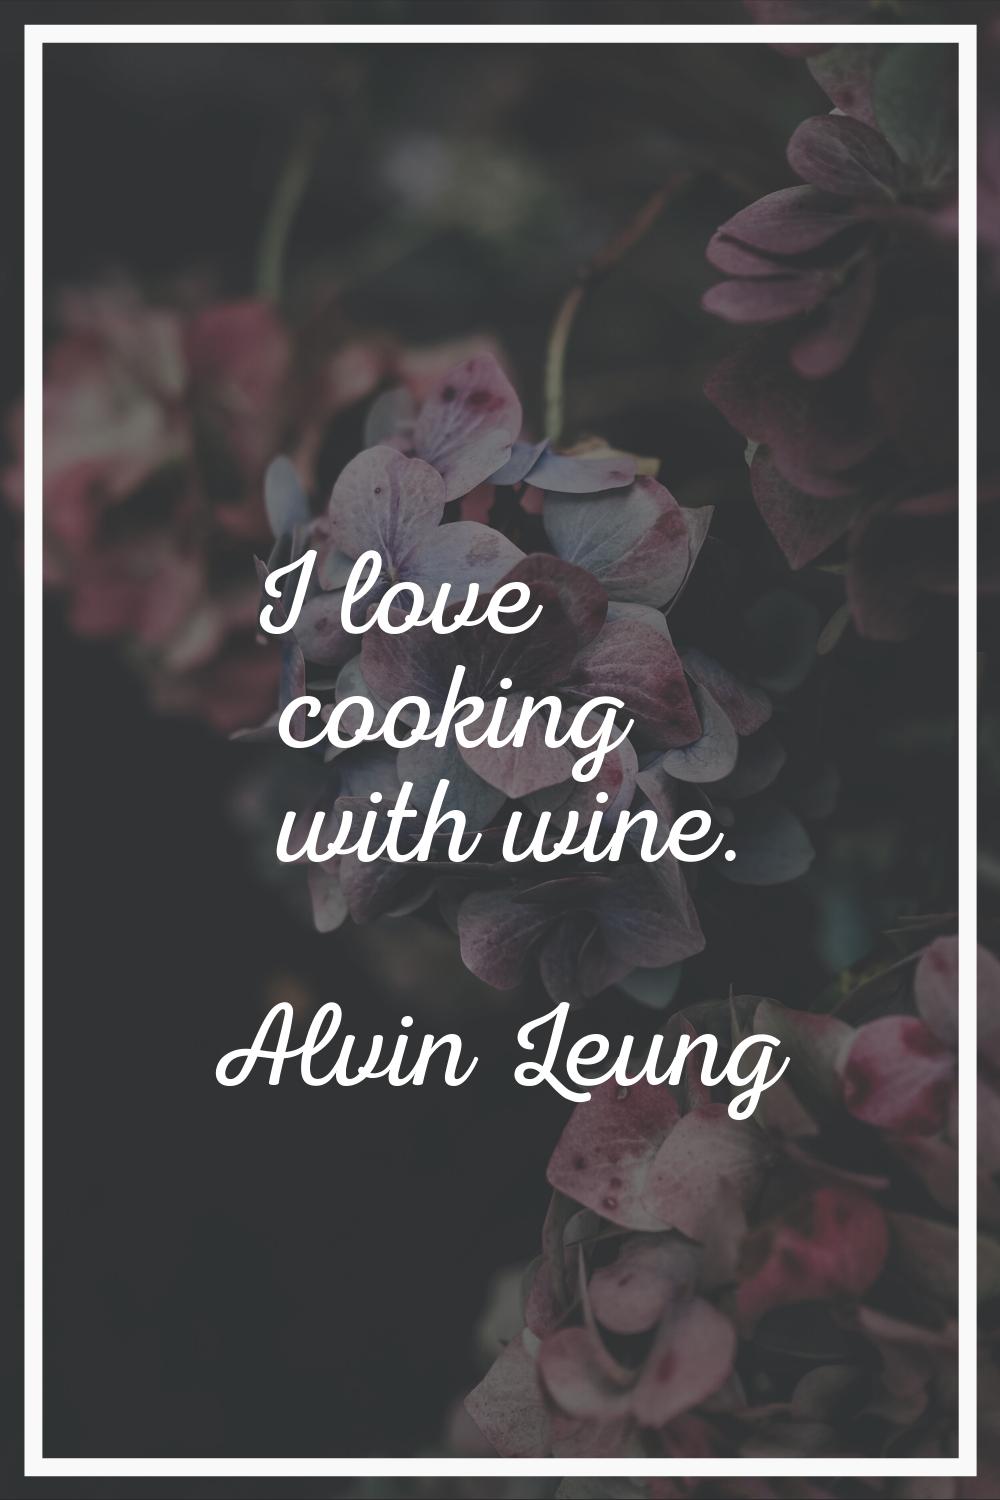 I love cooking with wine.